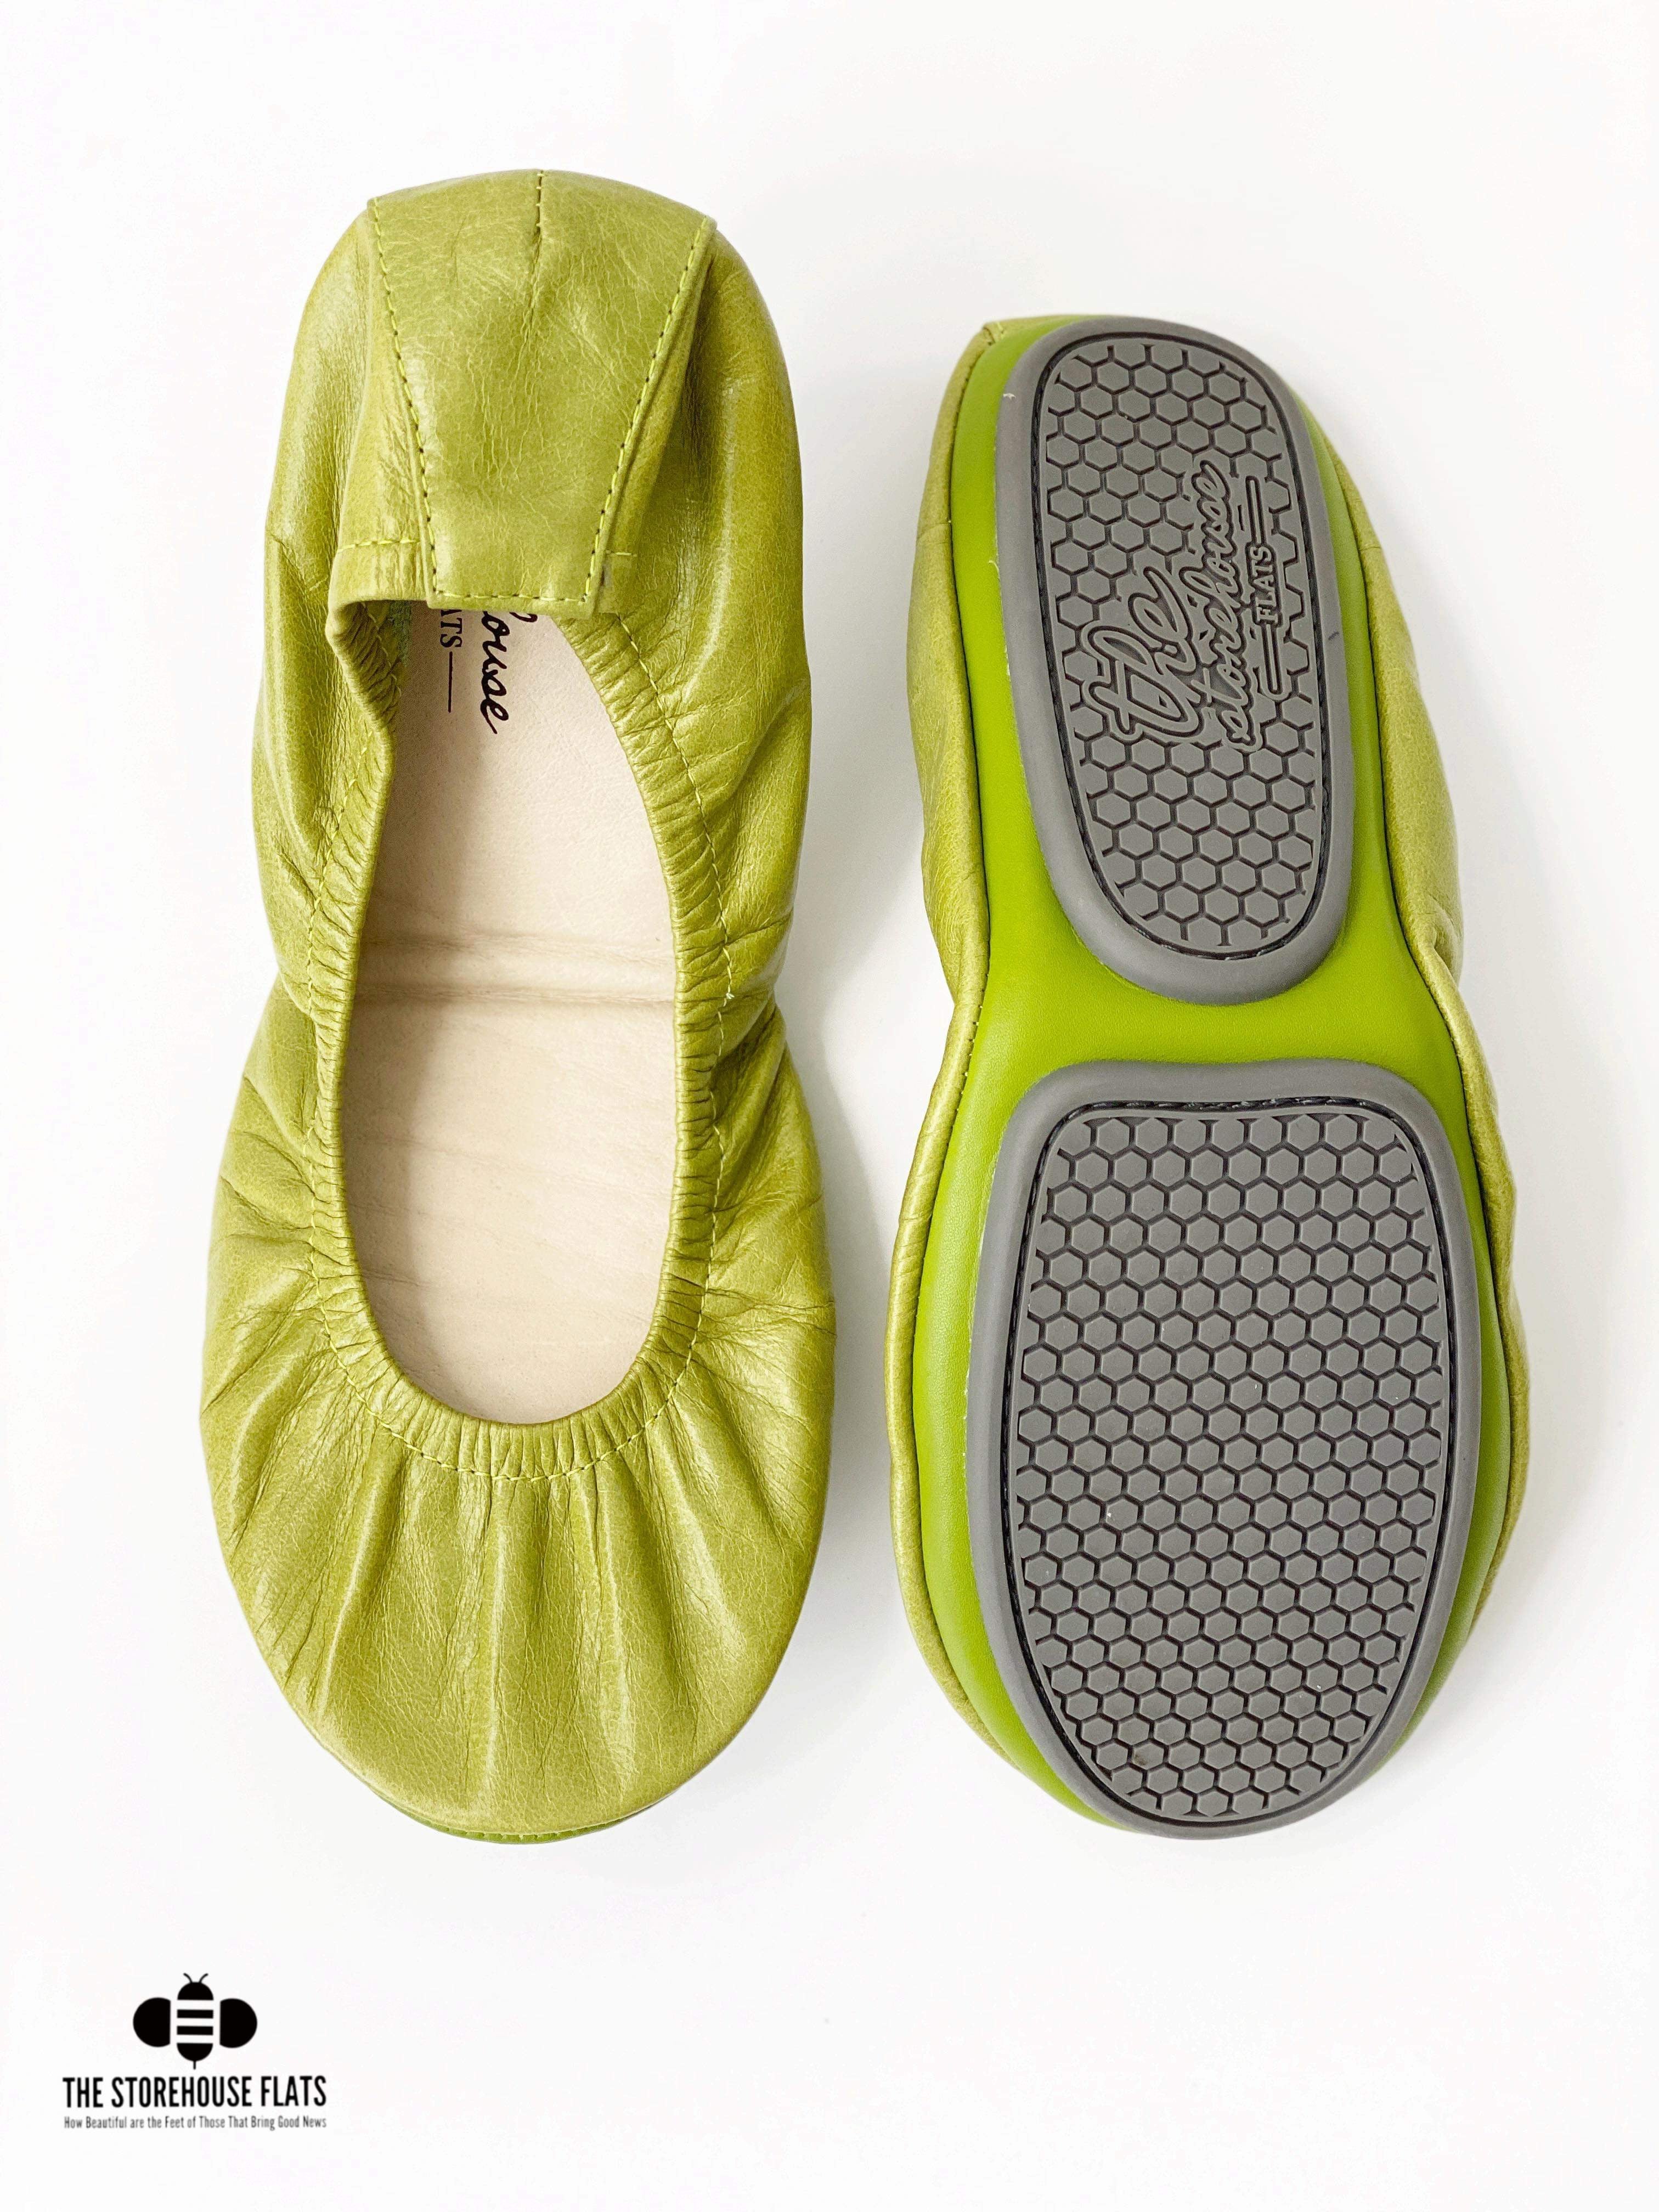 AVOCADO OIL TANNED | IN STOCK - The Storehouse Flats